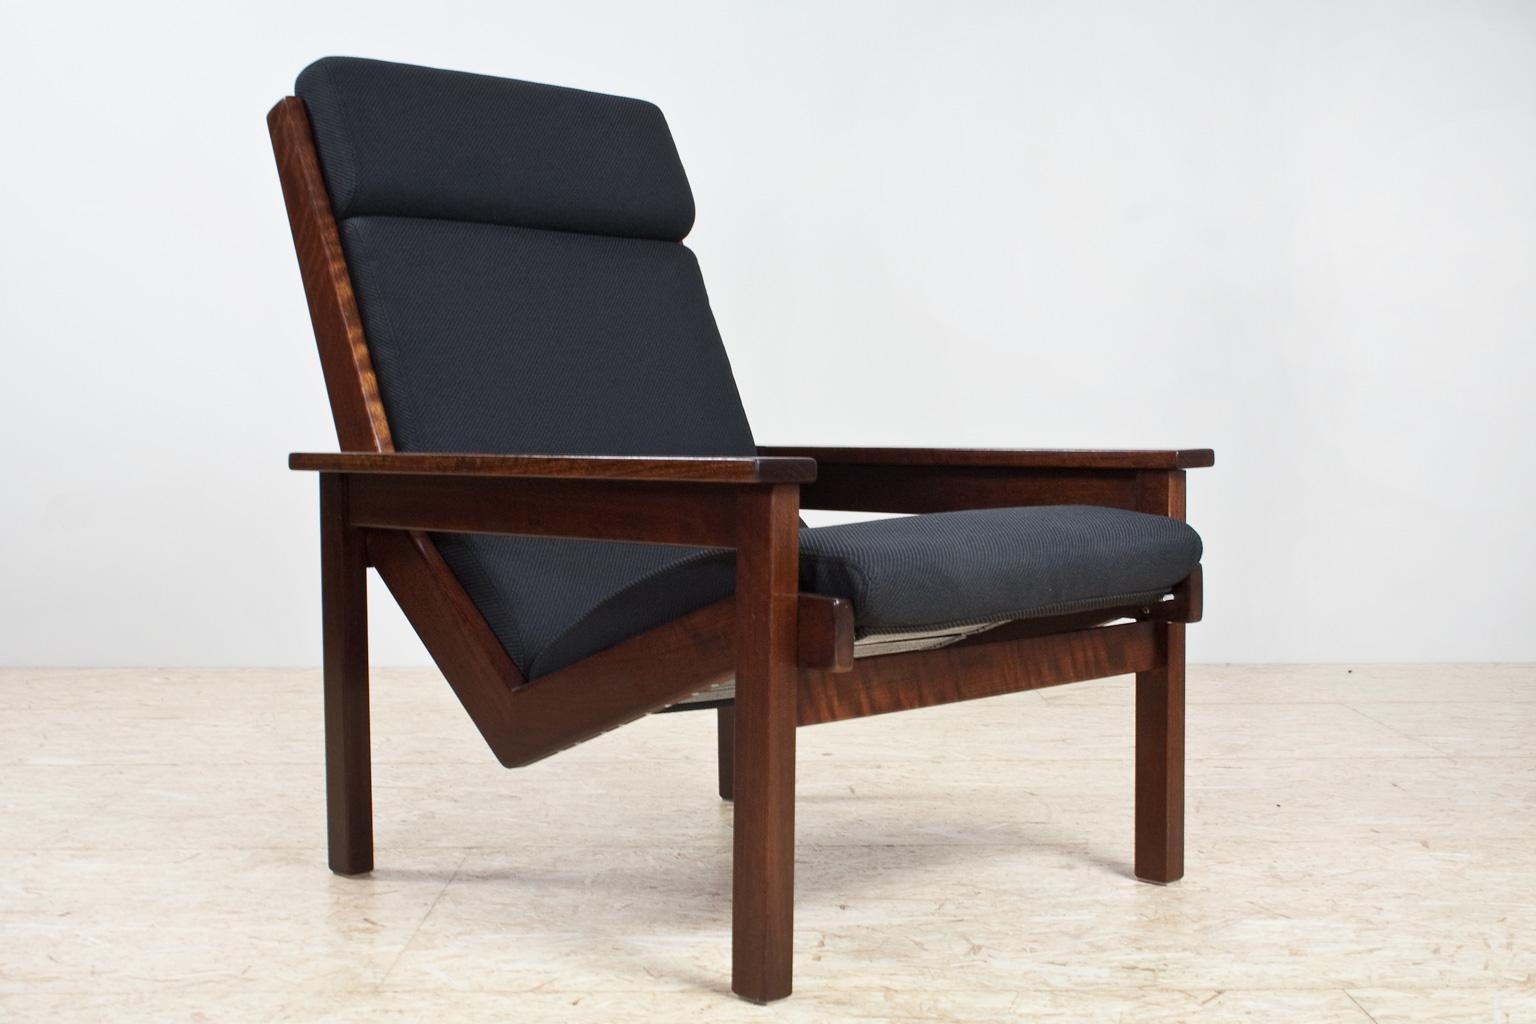 Mid-Century Modern Dutch Lotus lounge chair by Rob Parry, 1960s the Netherlands for Gelderland De Ster. Elegant, high back and Scandinavian style armchair, frame in solid teak with new cushion. 
The cushion is completely new and upholstered in a